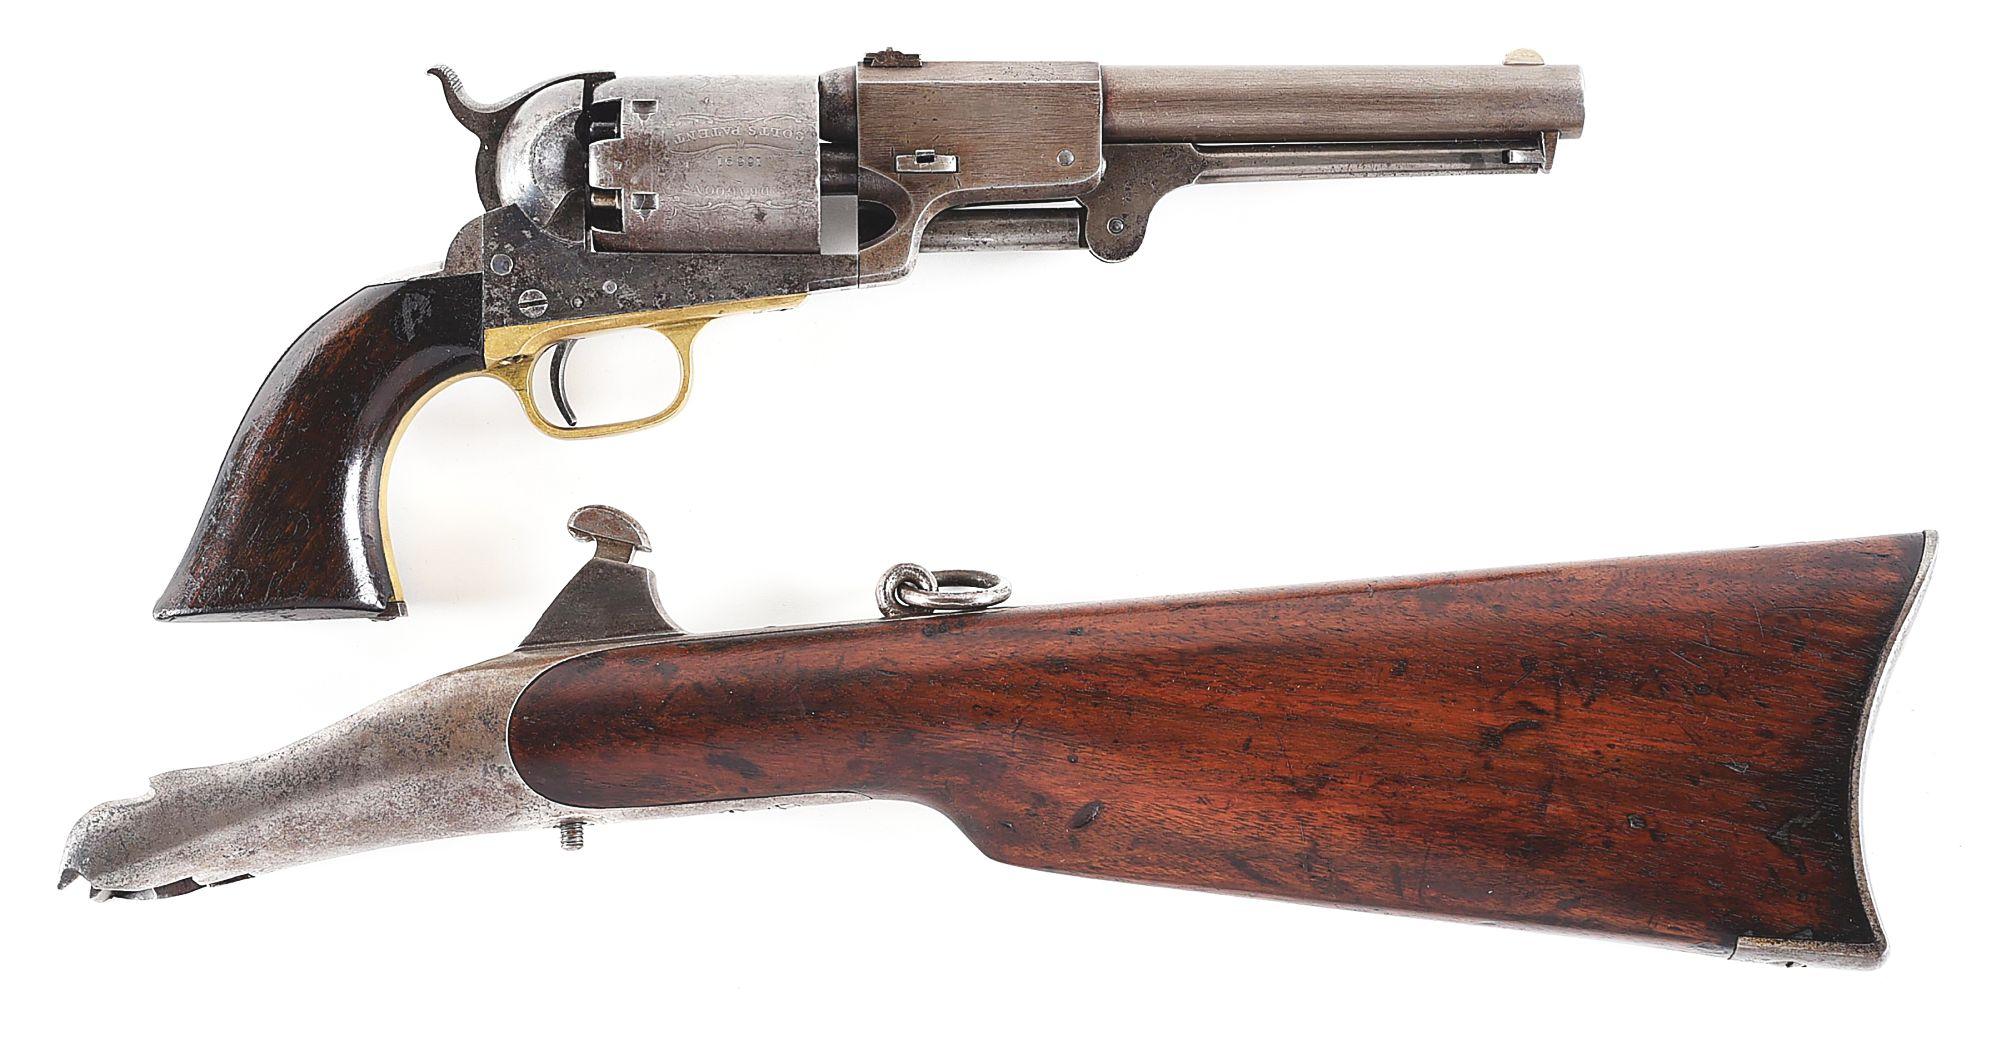 (A) MARTIALLY MARKED 3RD MODEL COLT DRAGOON WITH SHOULDER STOCK.